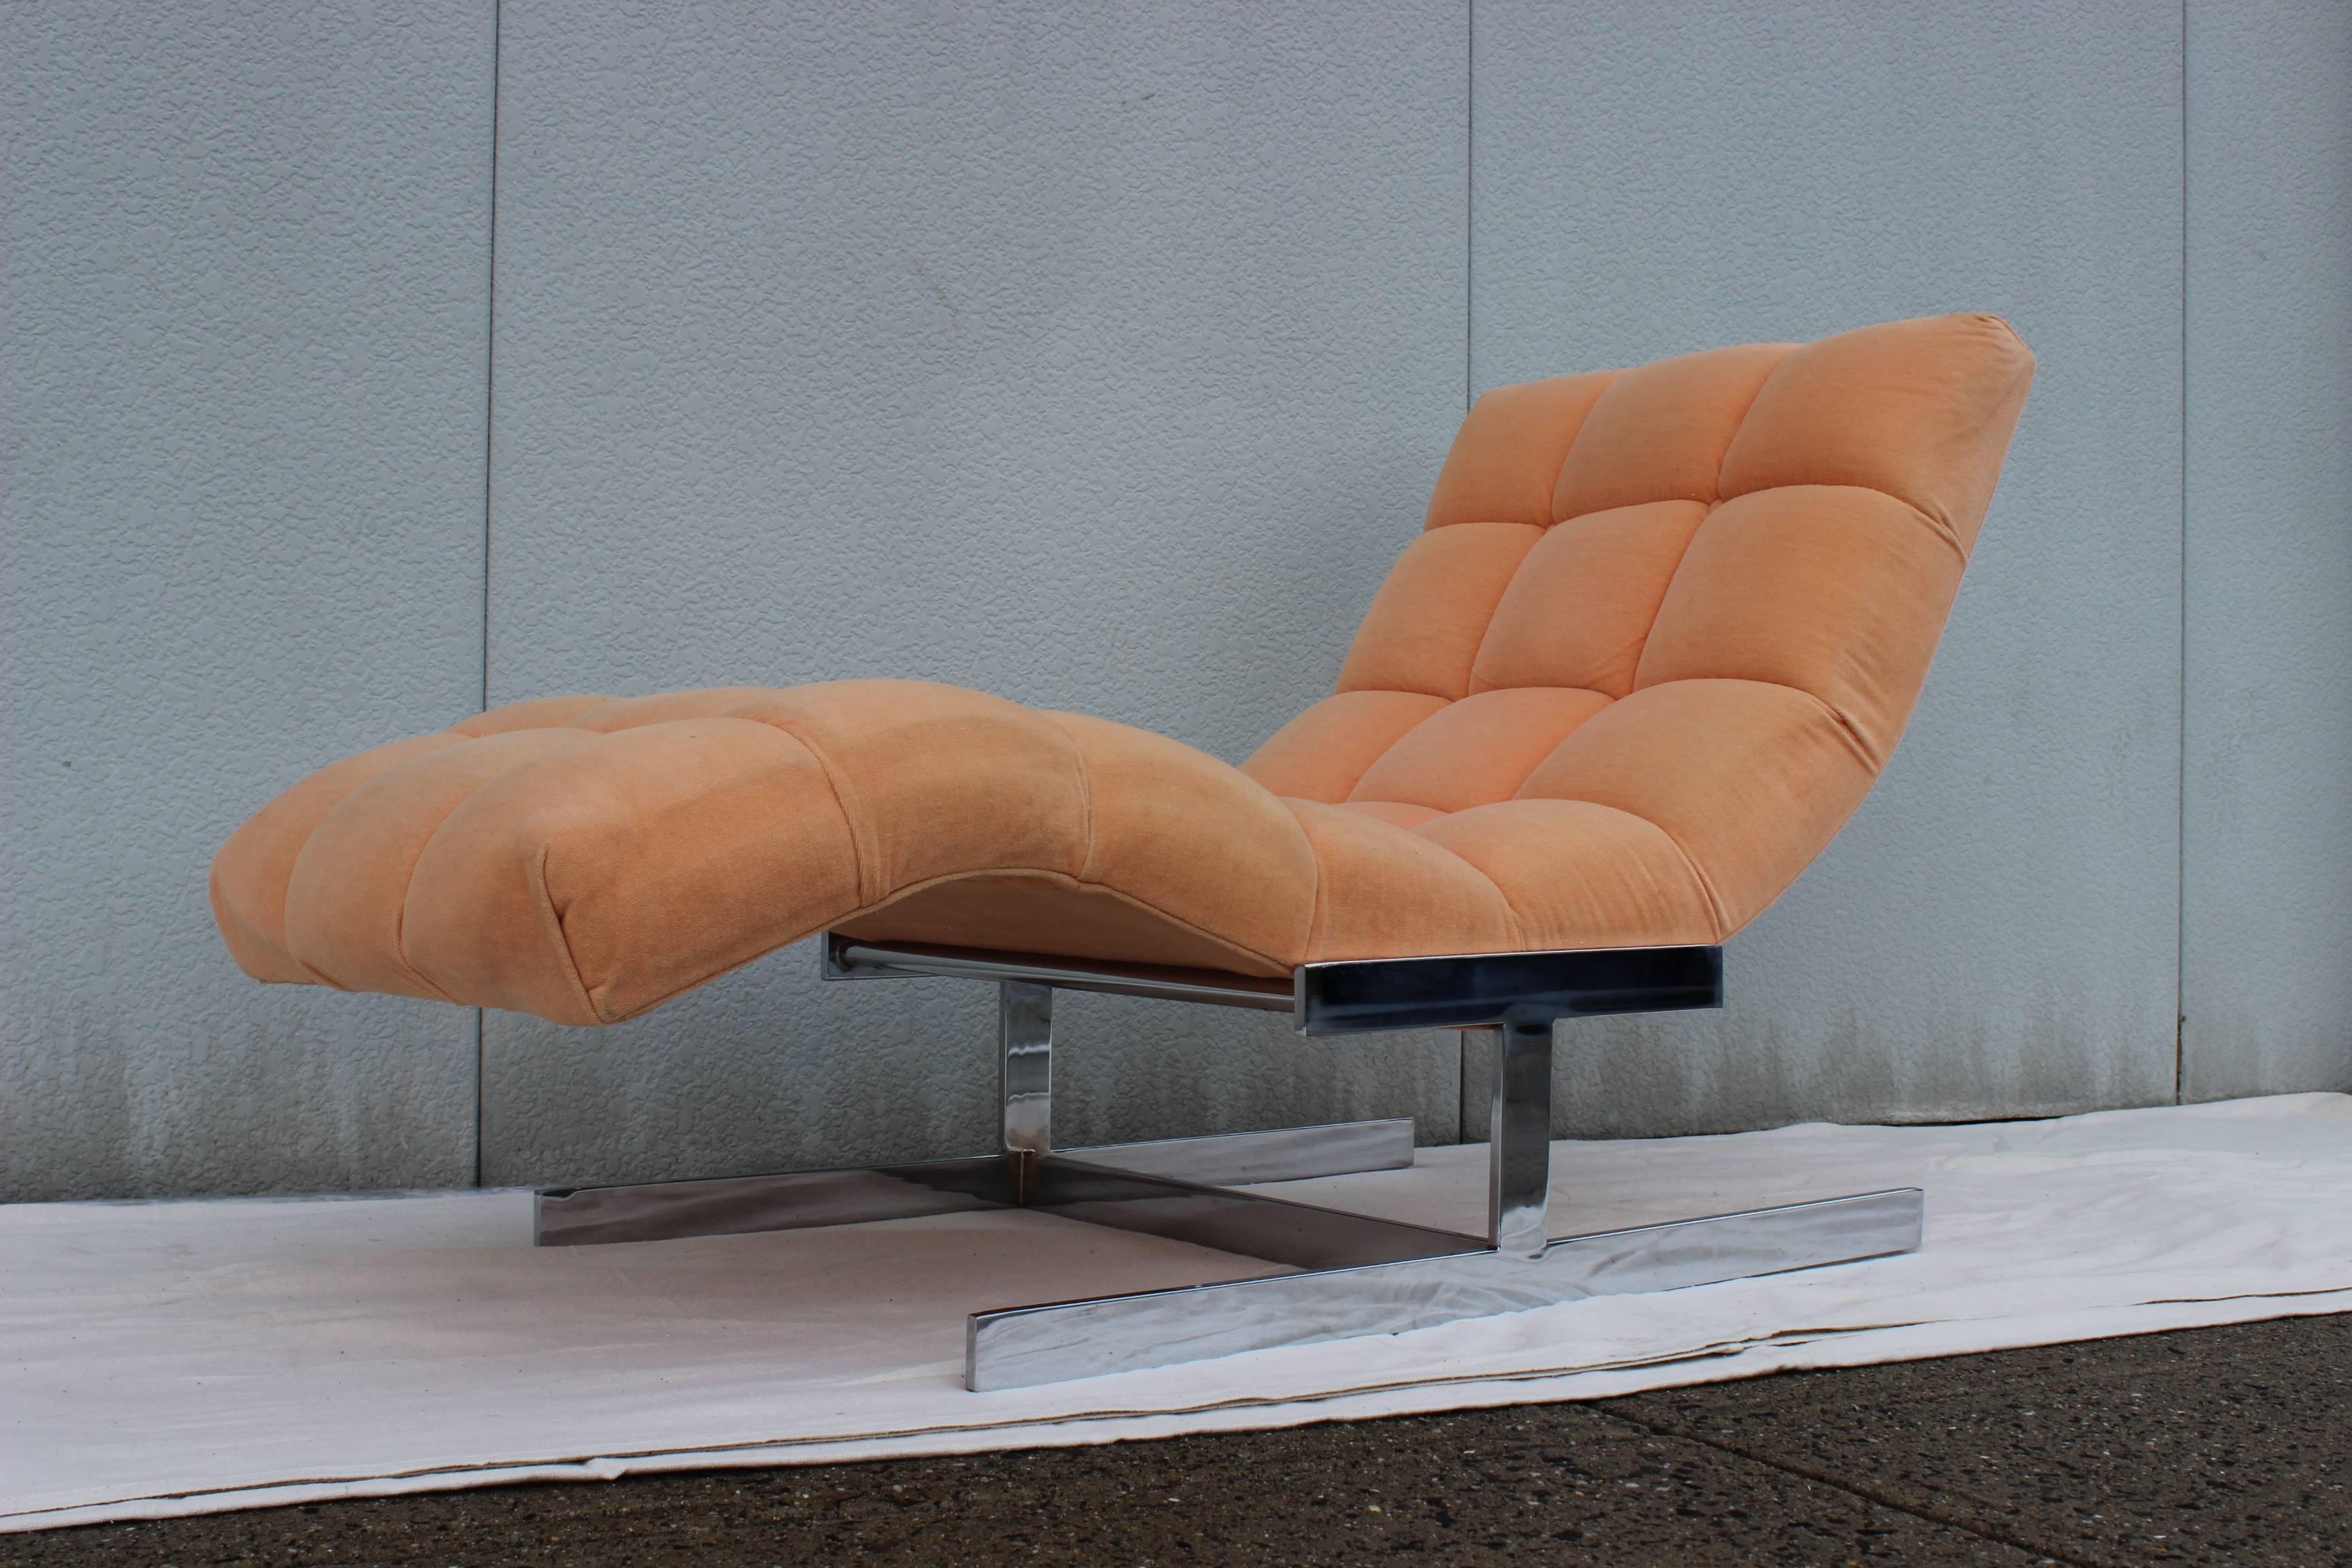 Stunning 1970s wave chaise longue by Milo Baughman in vintage velvet upholstery.